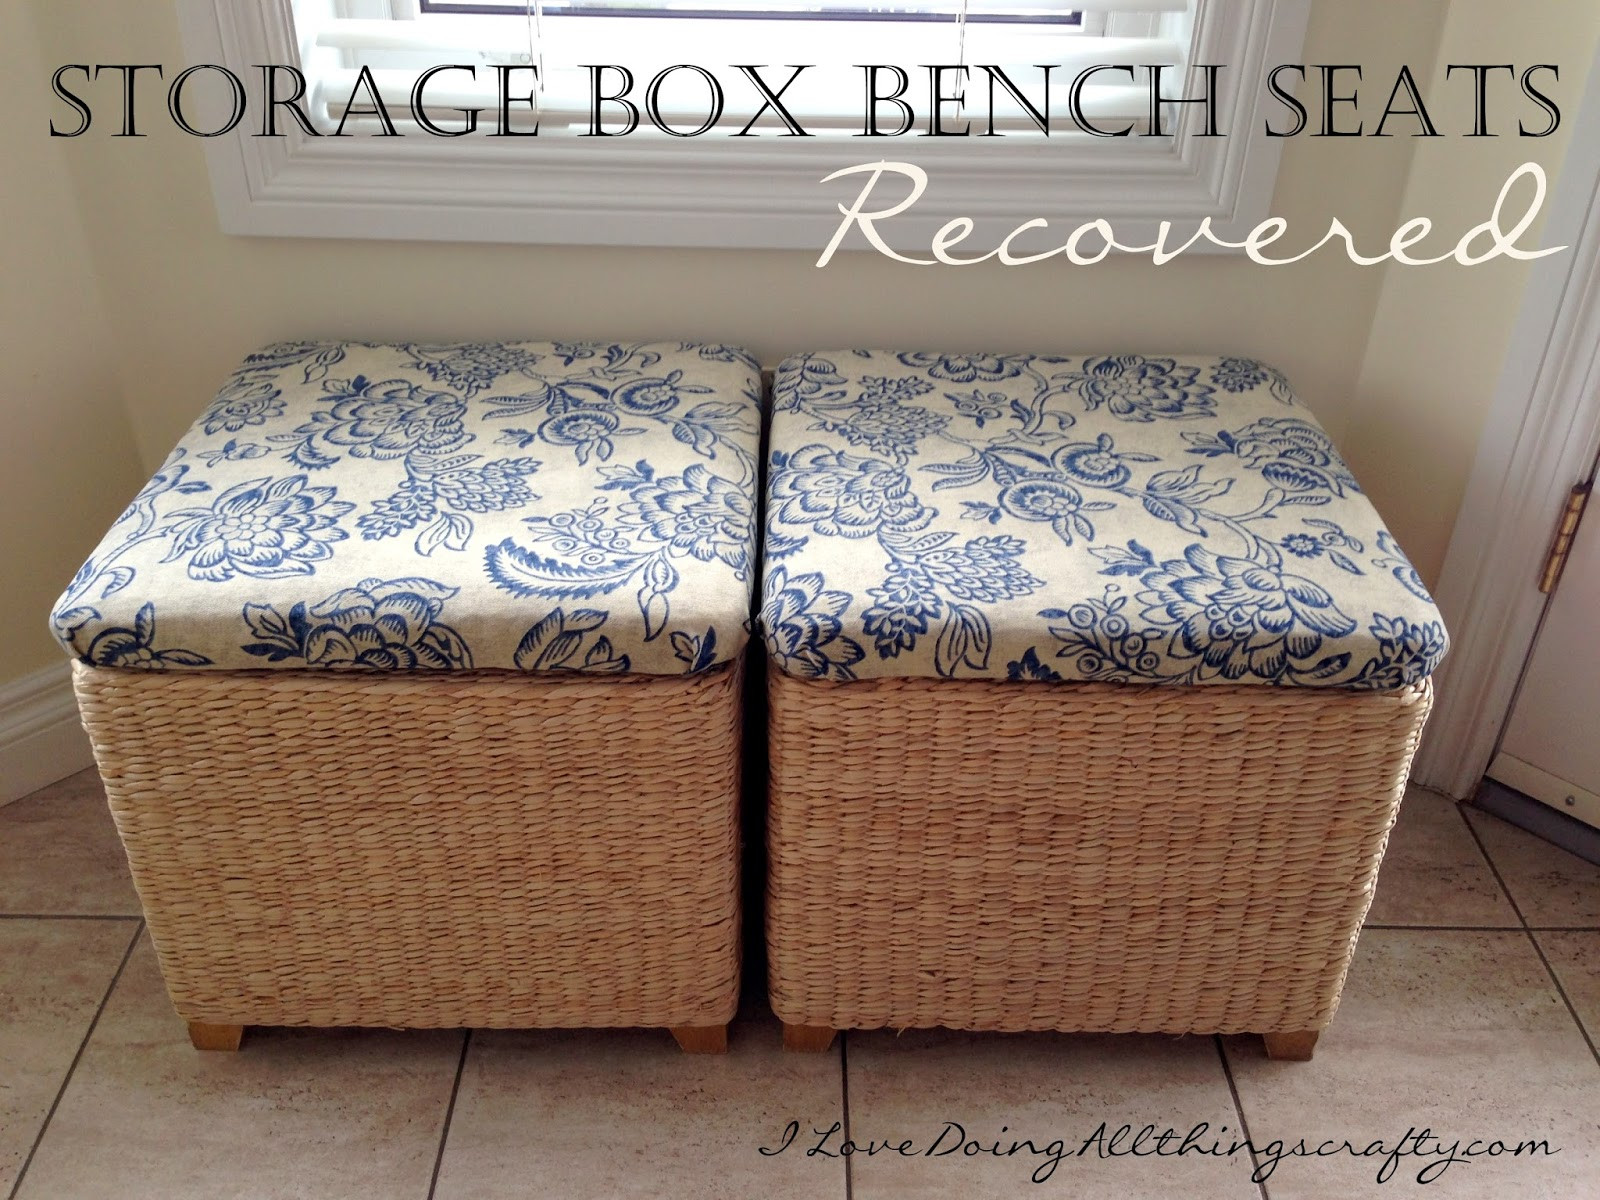 Storage Box Bench Seat
 I Love Doing All Things Crafty Storage Box Bench Seats